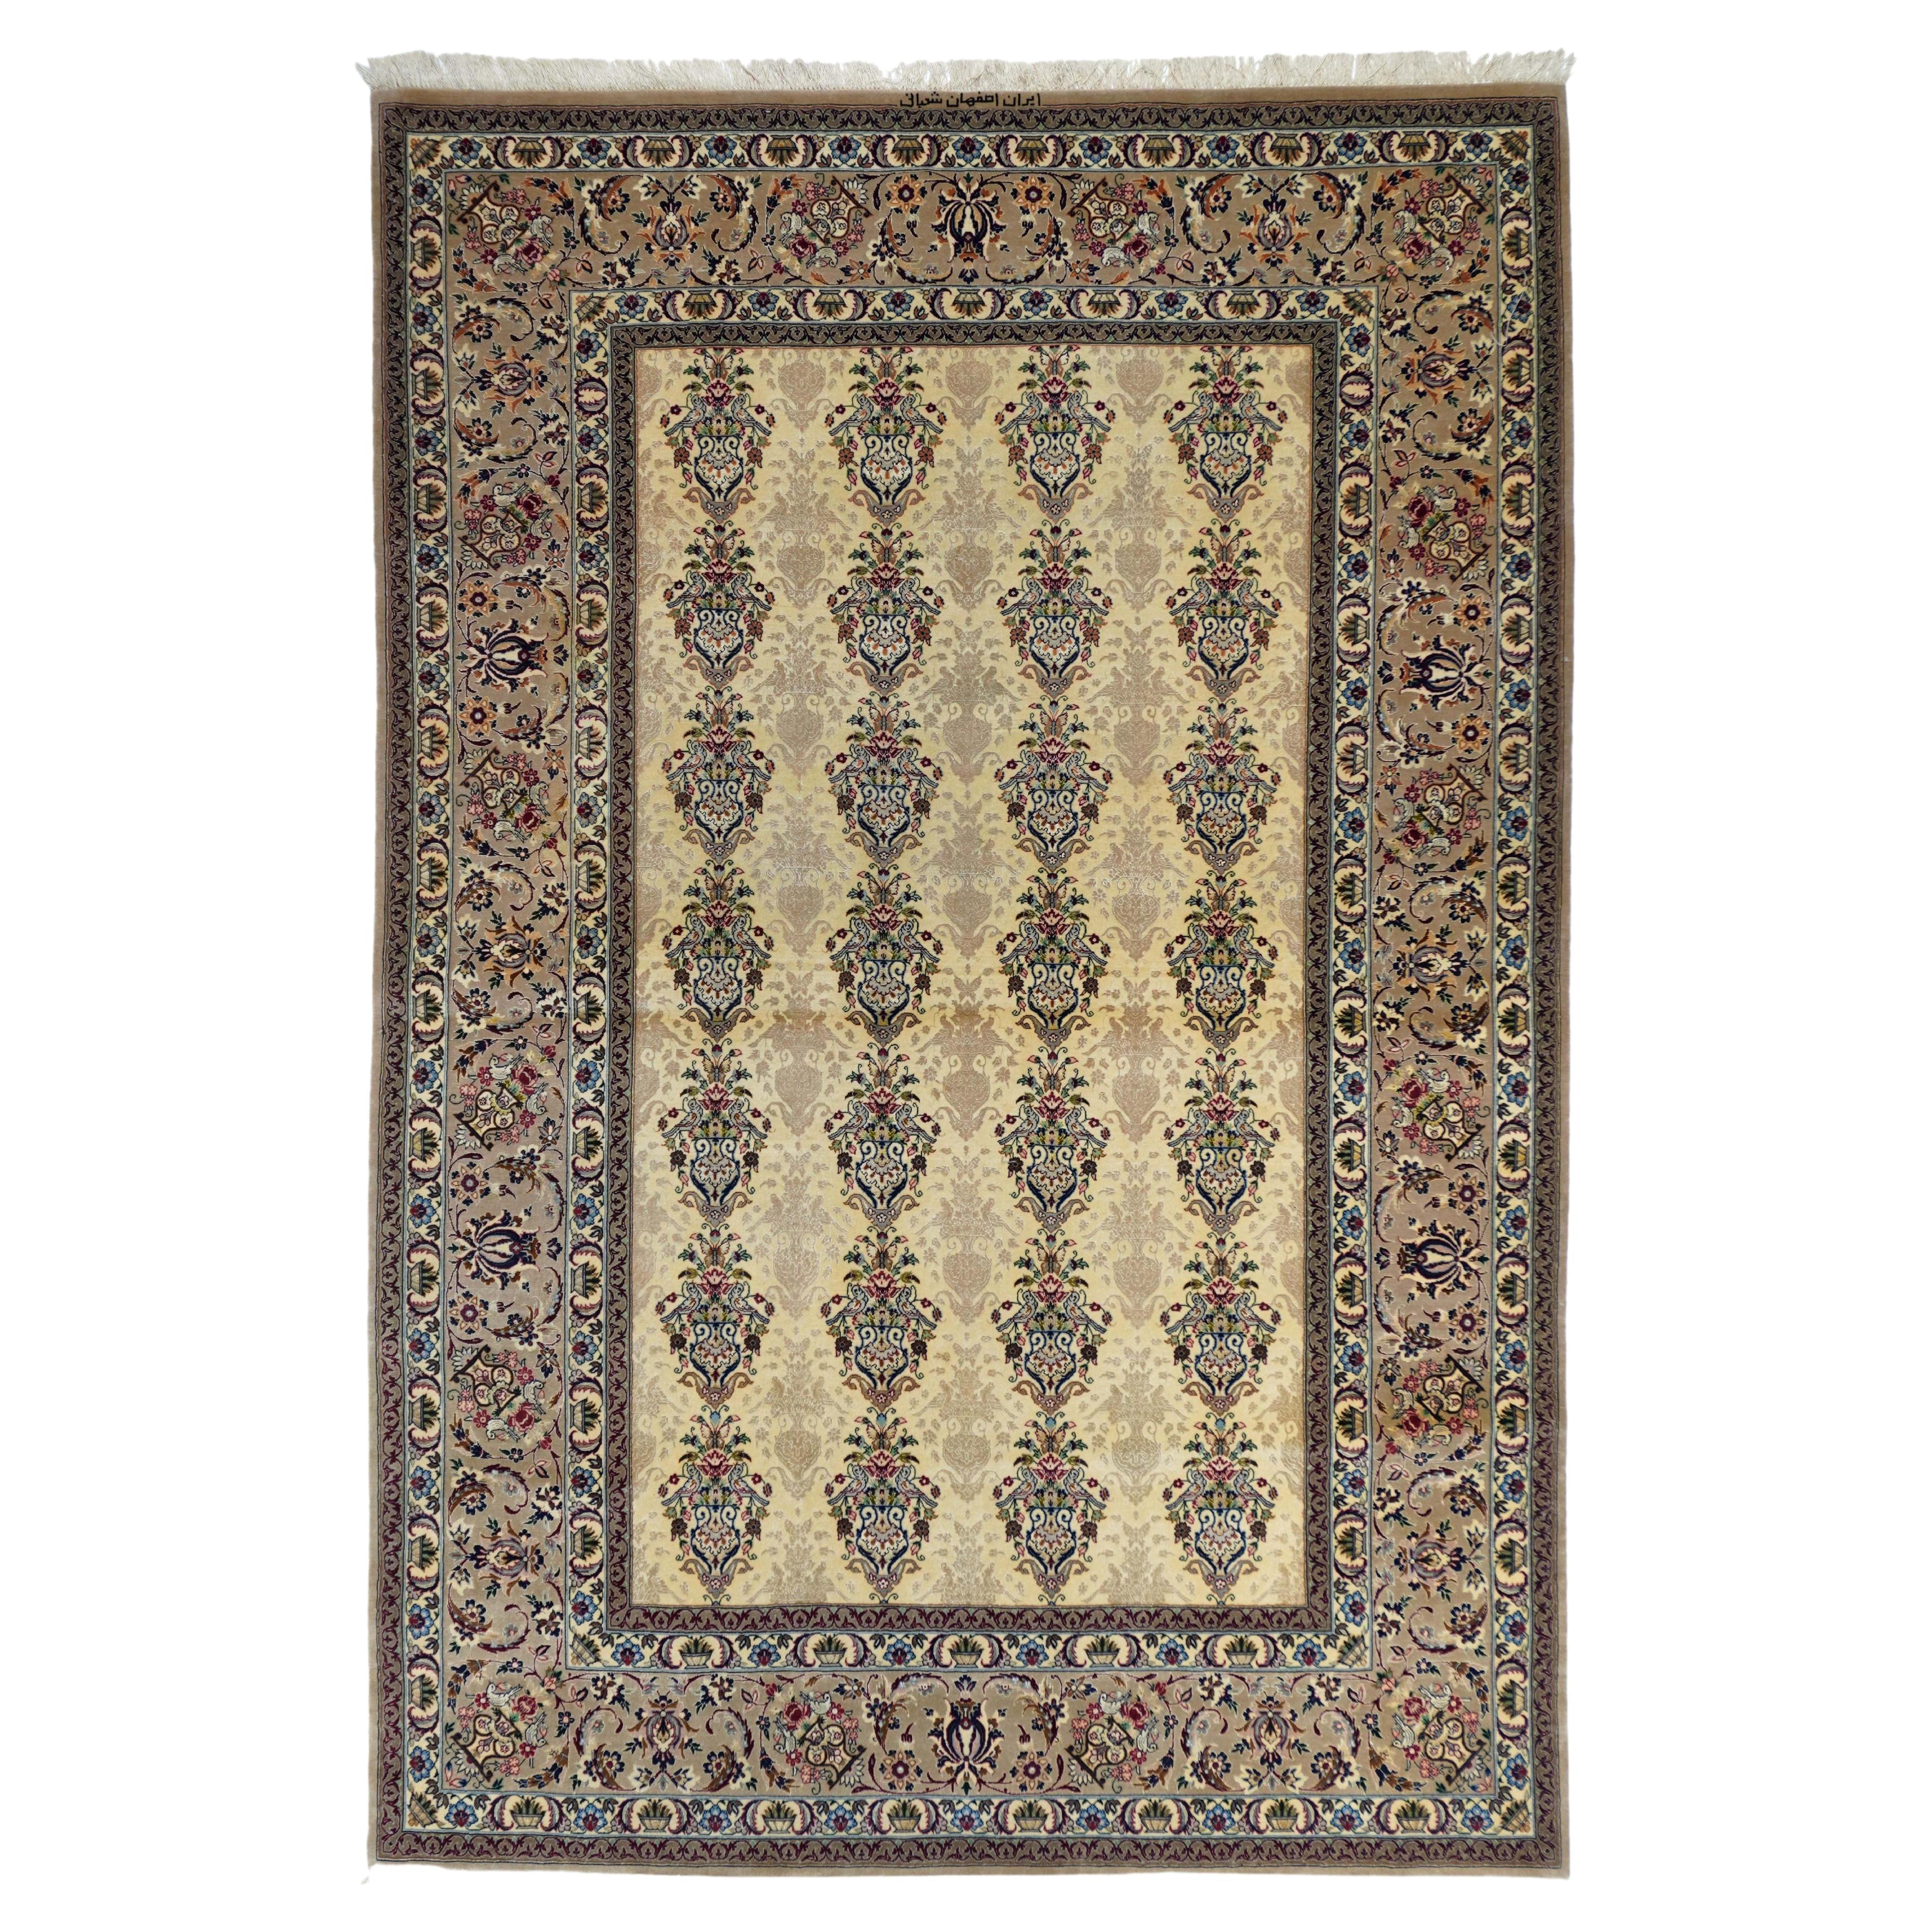 Extremely Fine Persian Isfahan Wool and Silk Rug 5'1'' x 7'6''